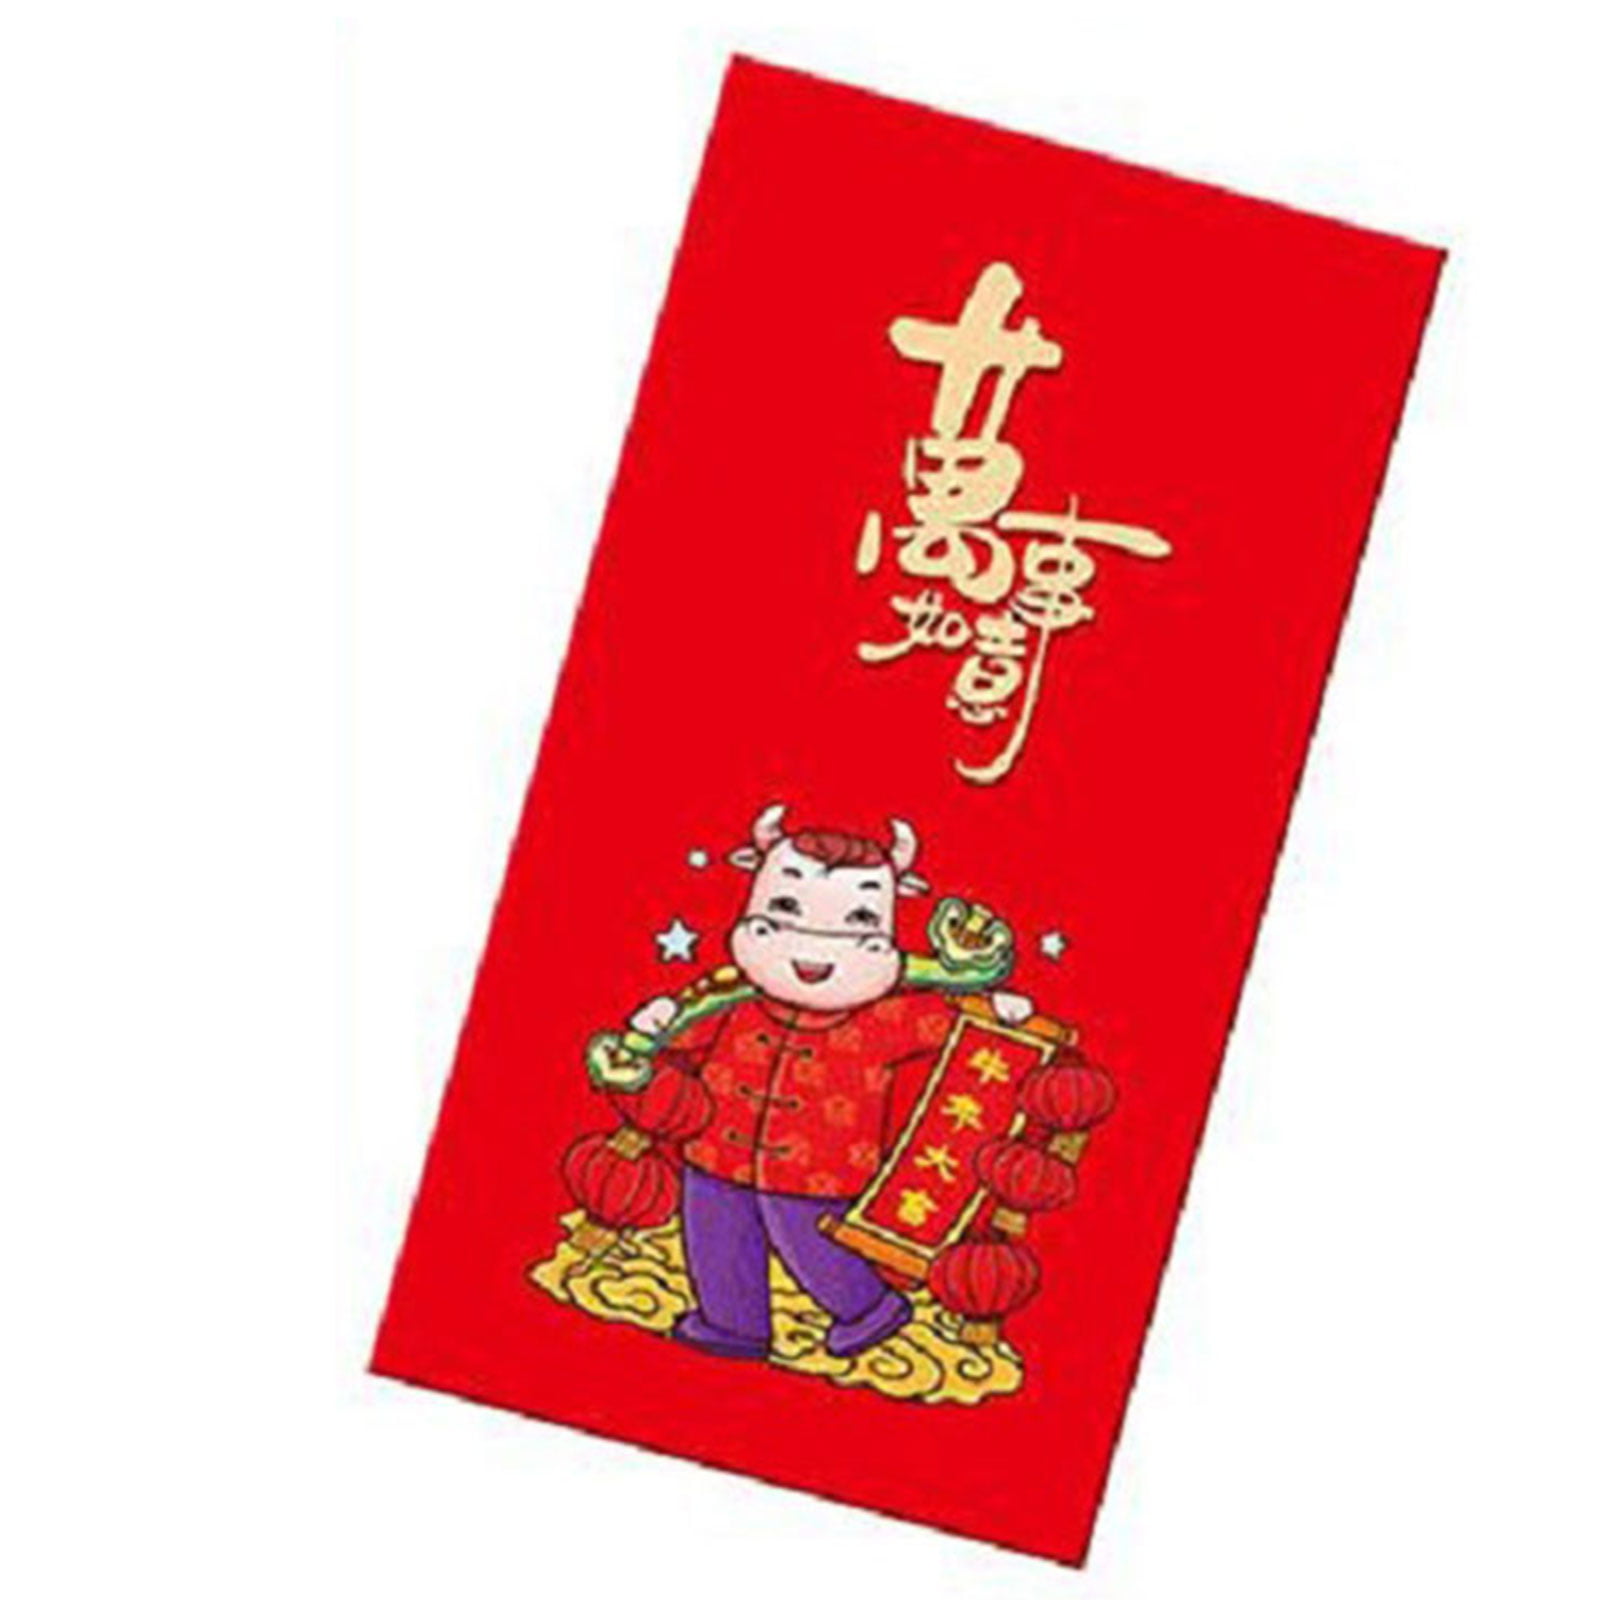  Ciieeo 24pcs 2021 Year of the Ox lucky red envelope Ox Year Red  Pockets Chinese New Year Red Envelopes decorative envelopes pocket wallet  year of the ox chinese wedding envelopes